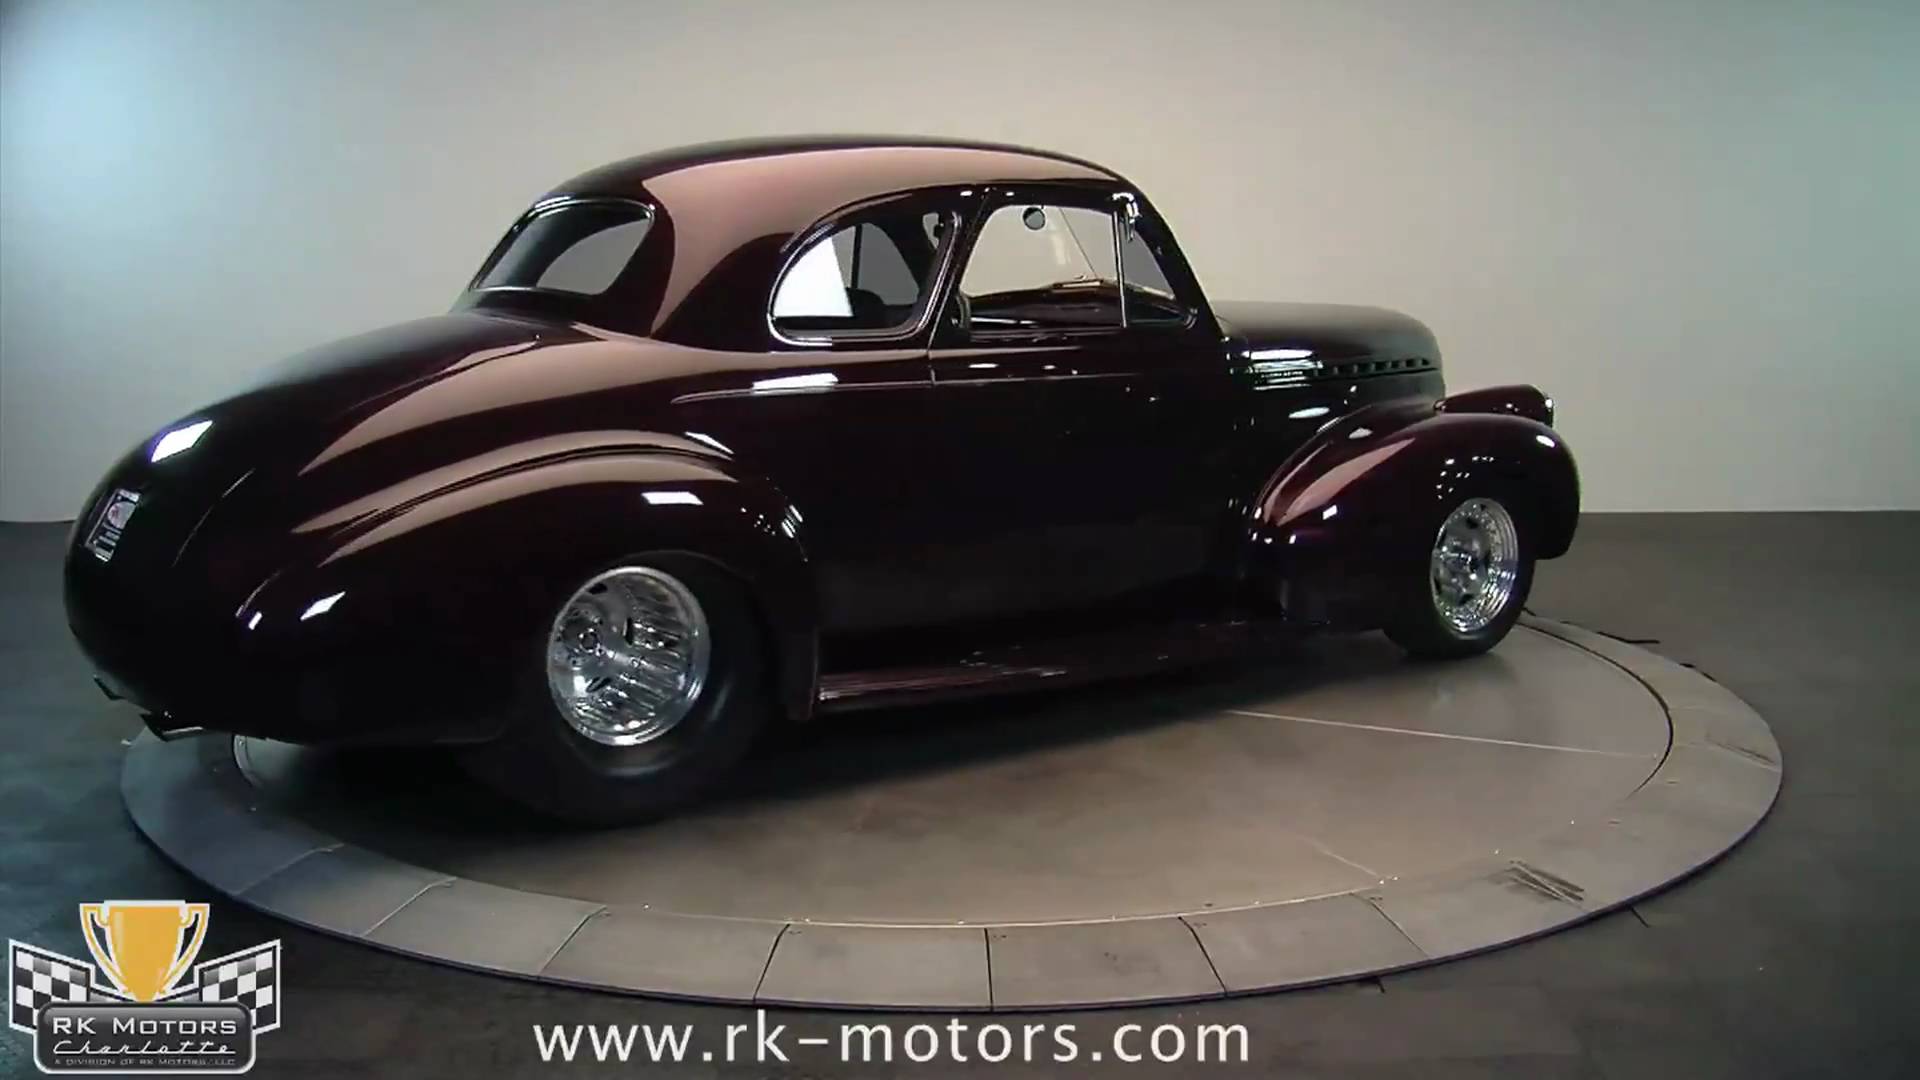 Amazing 1940 Chevrolet Coupe Pictures & Backgrounds